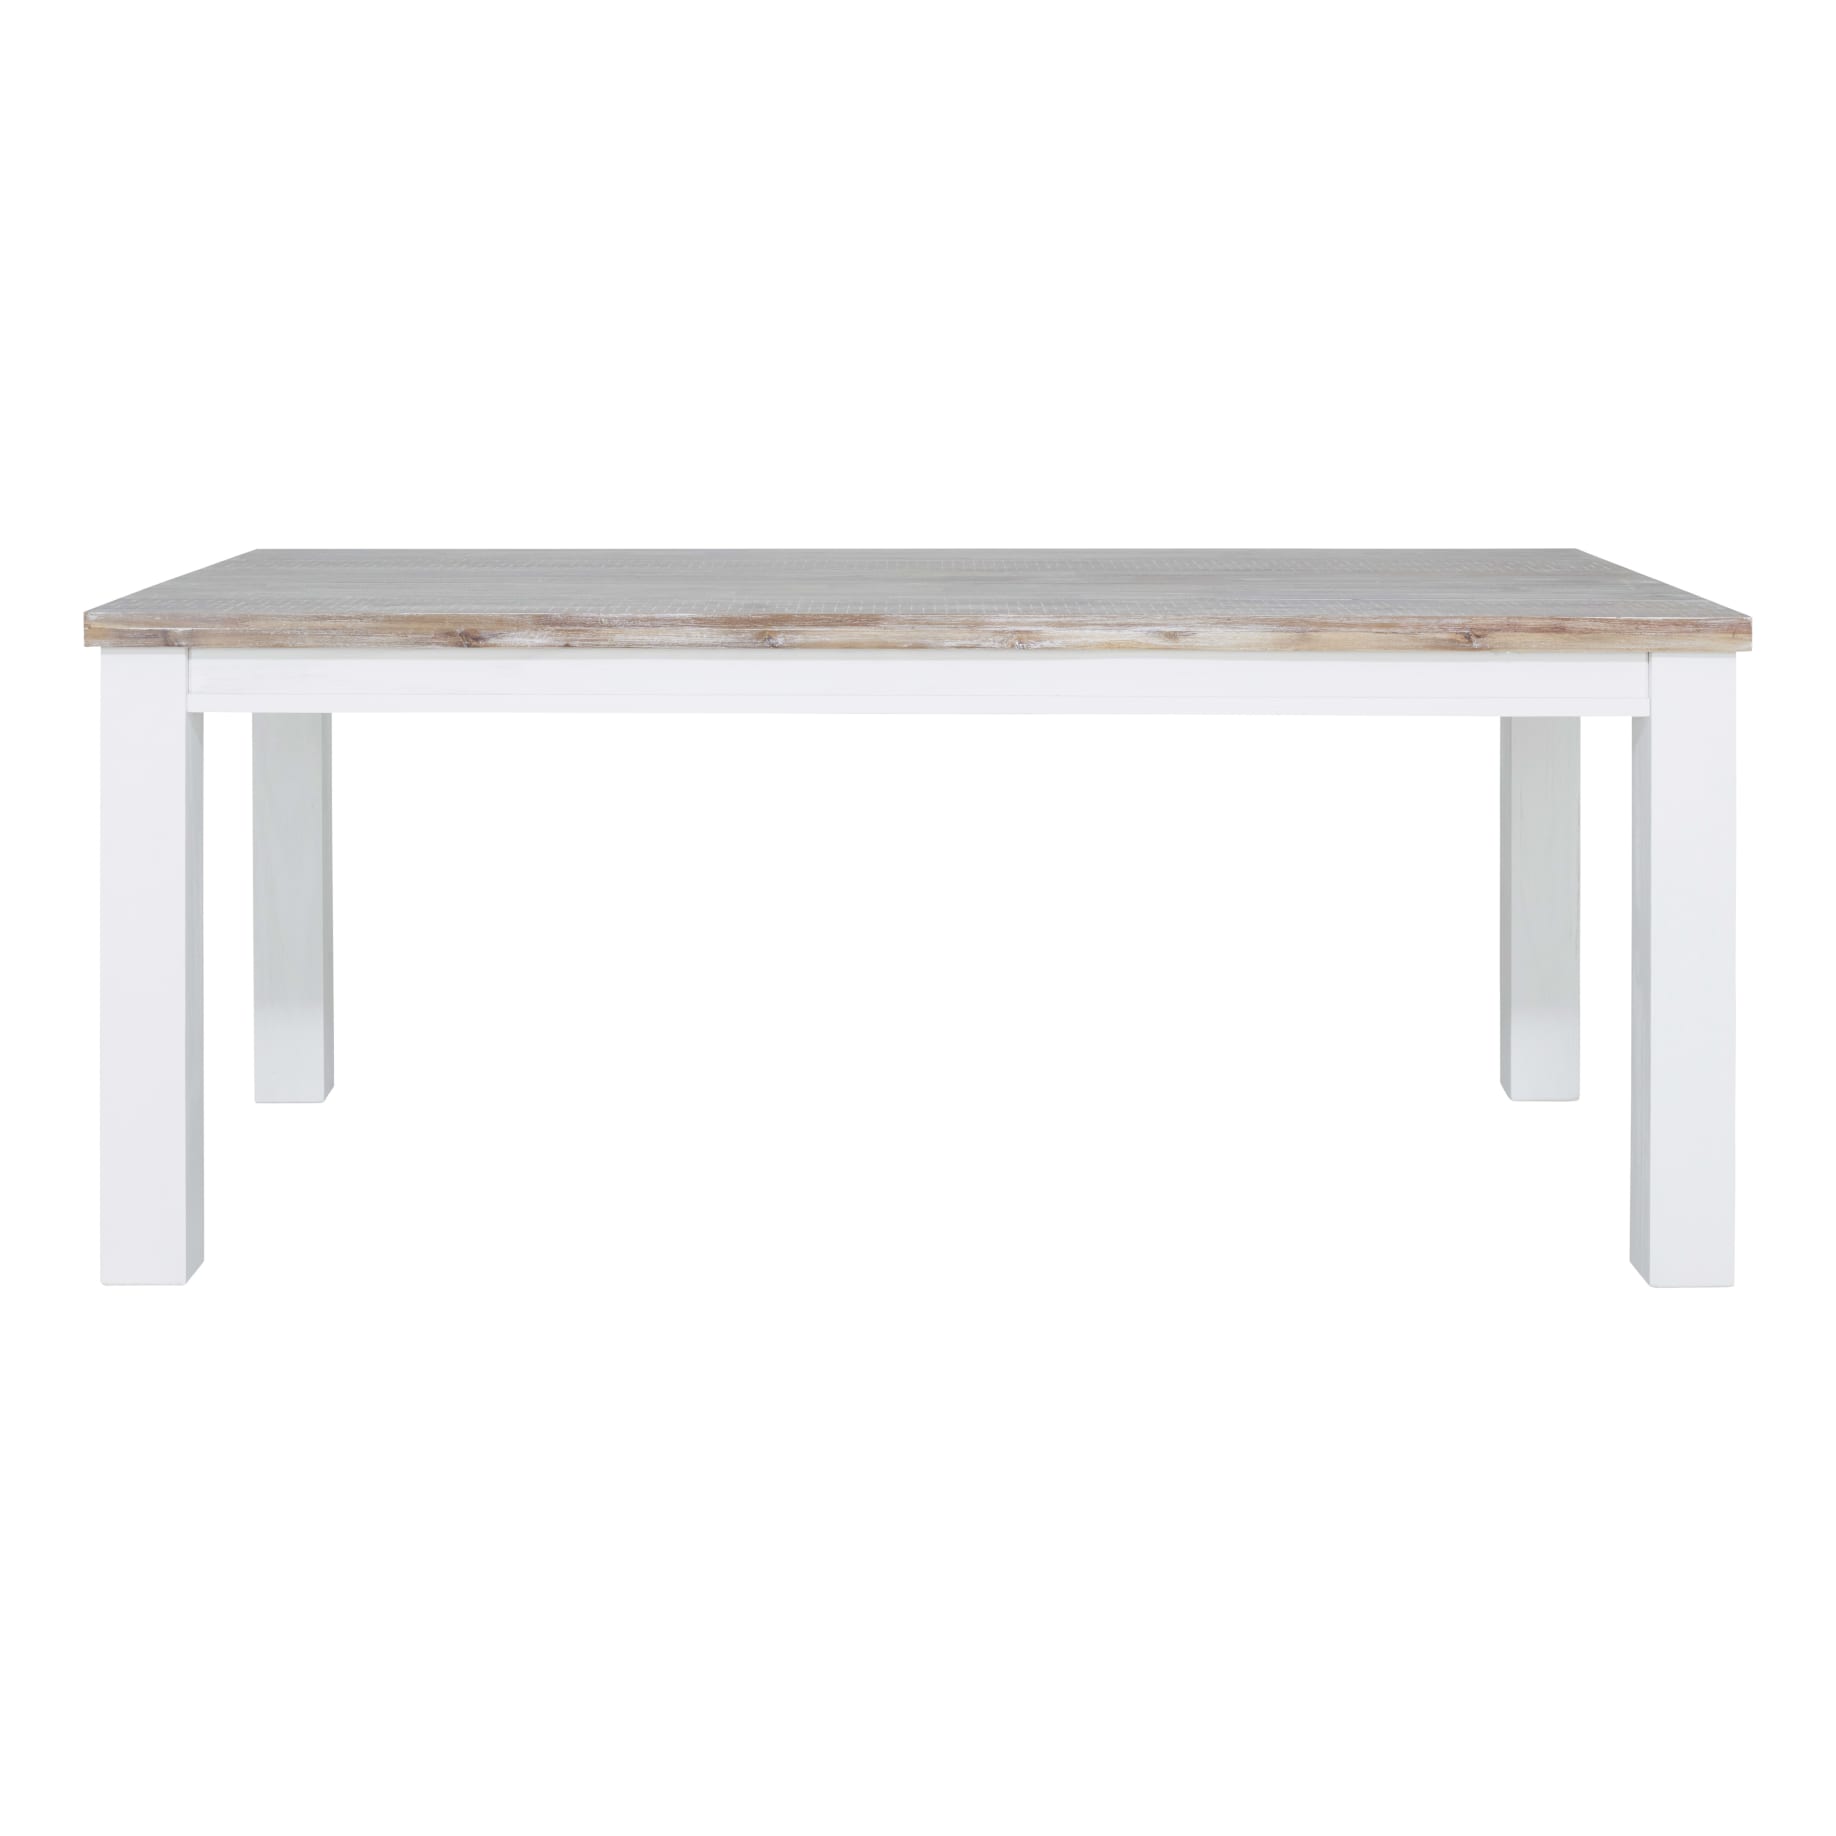 Halifax Dining Table 225cm in Acacia Timber Grey